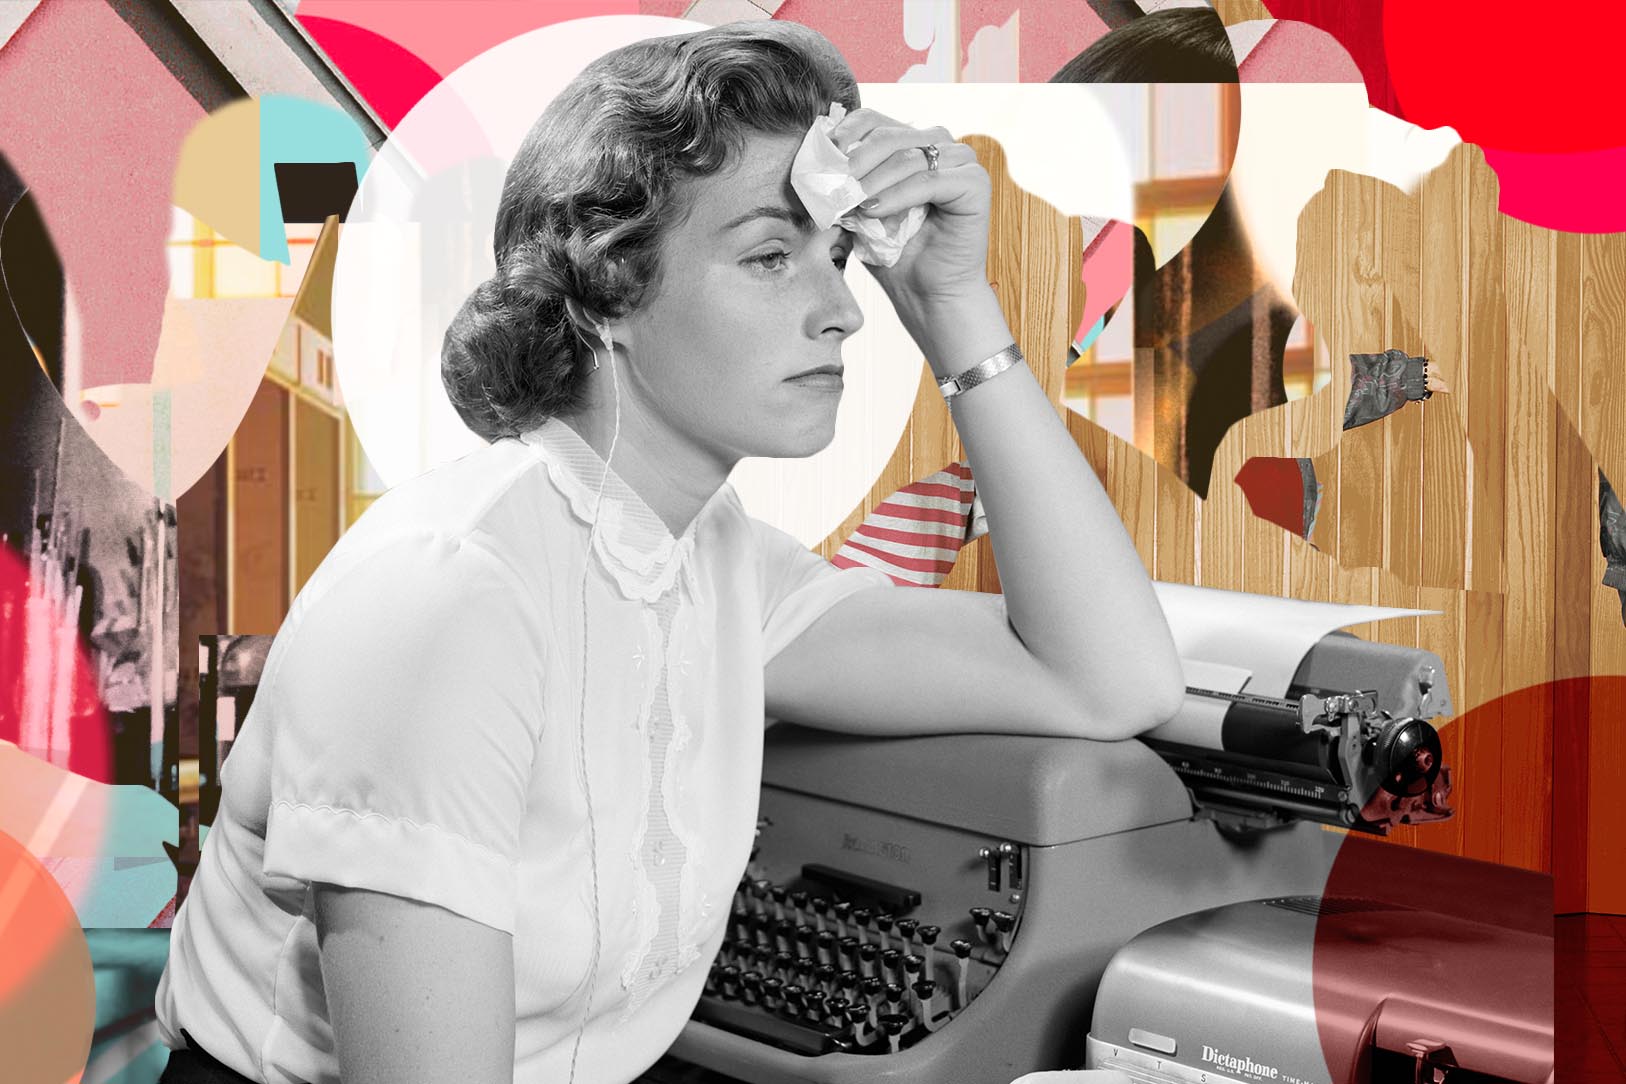 Exasperated female office worker sitting at typewriter.